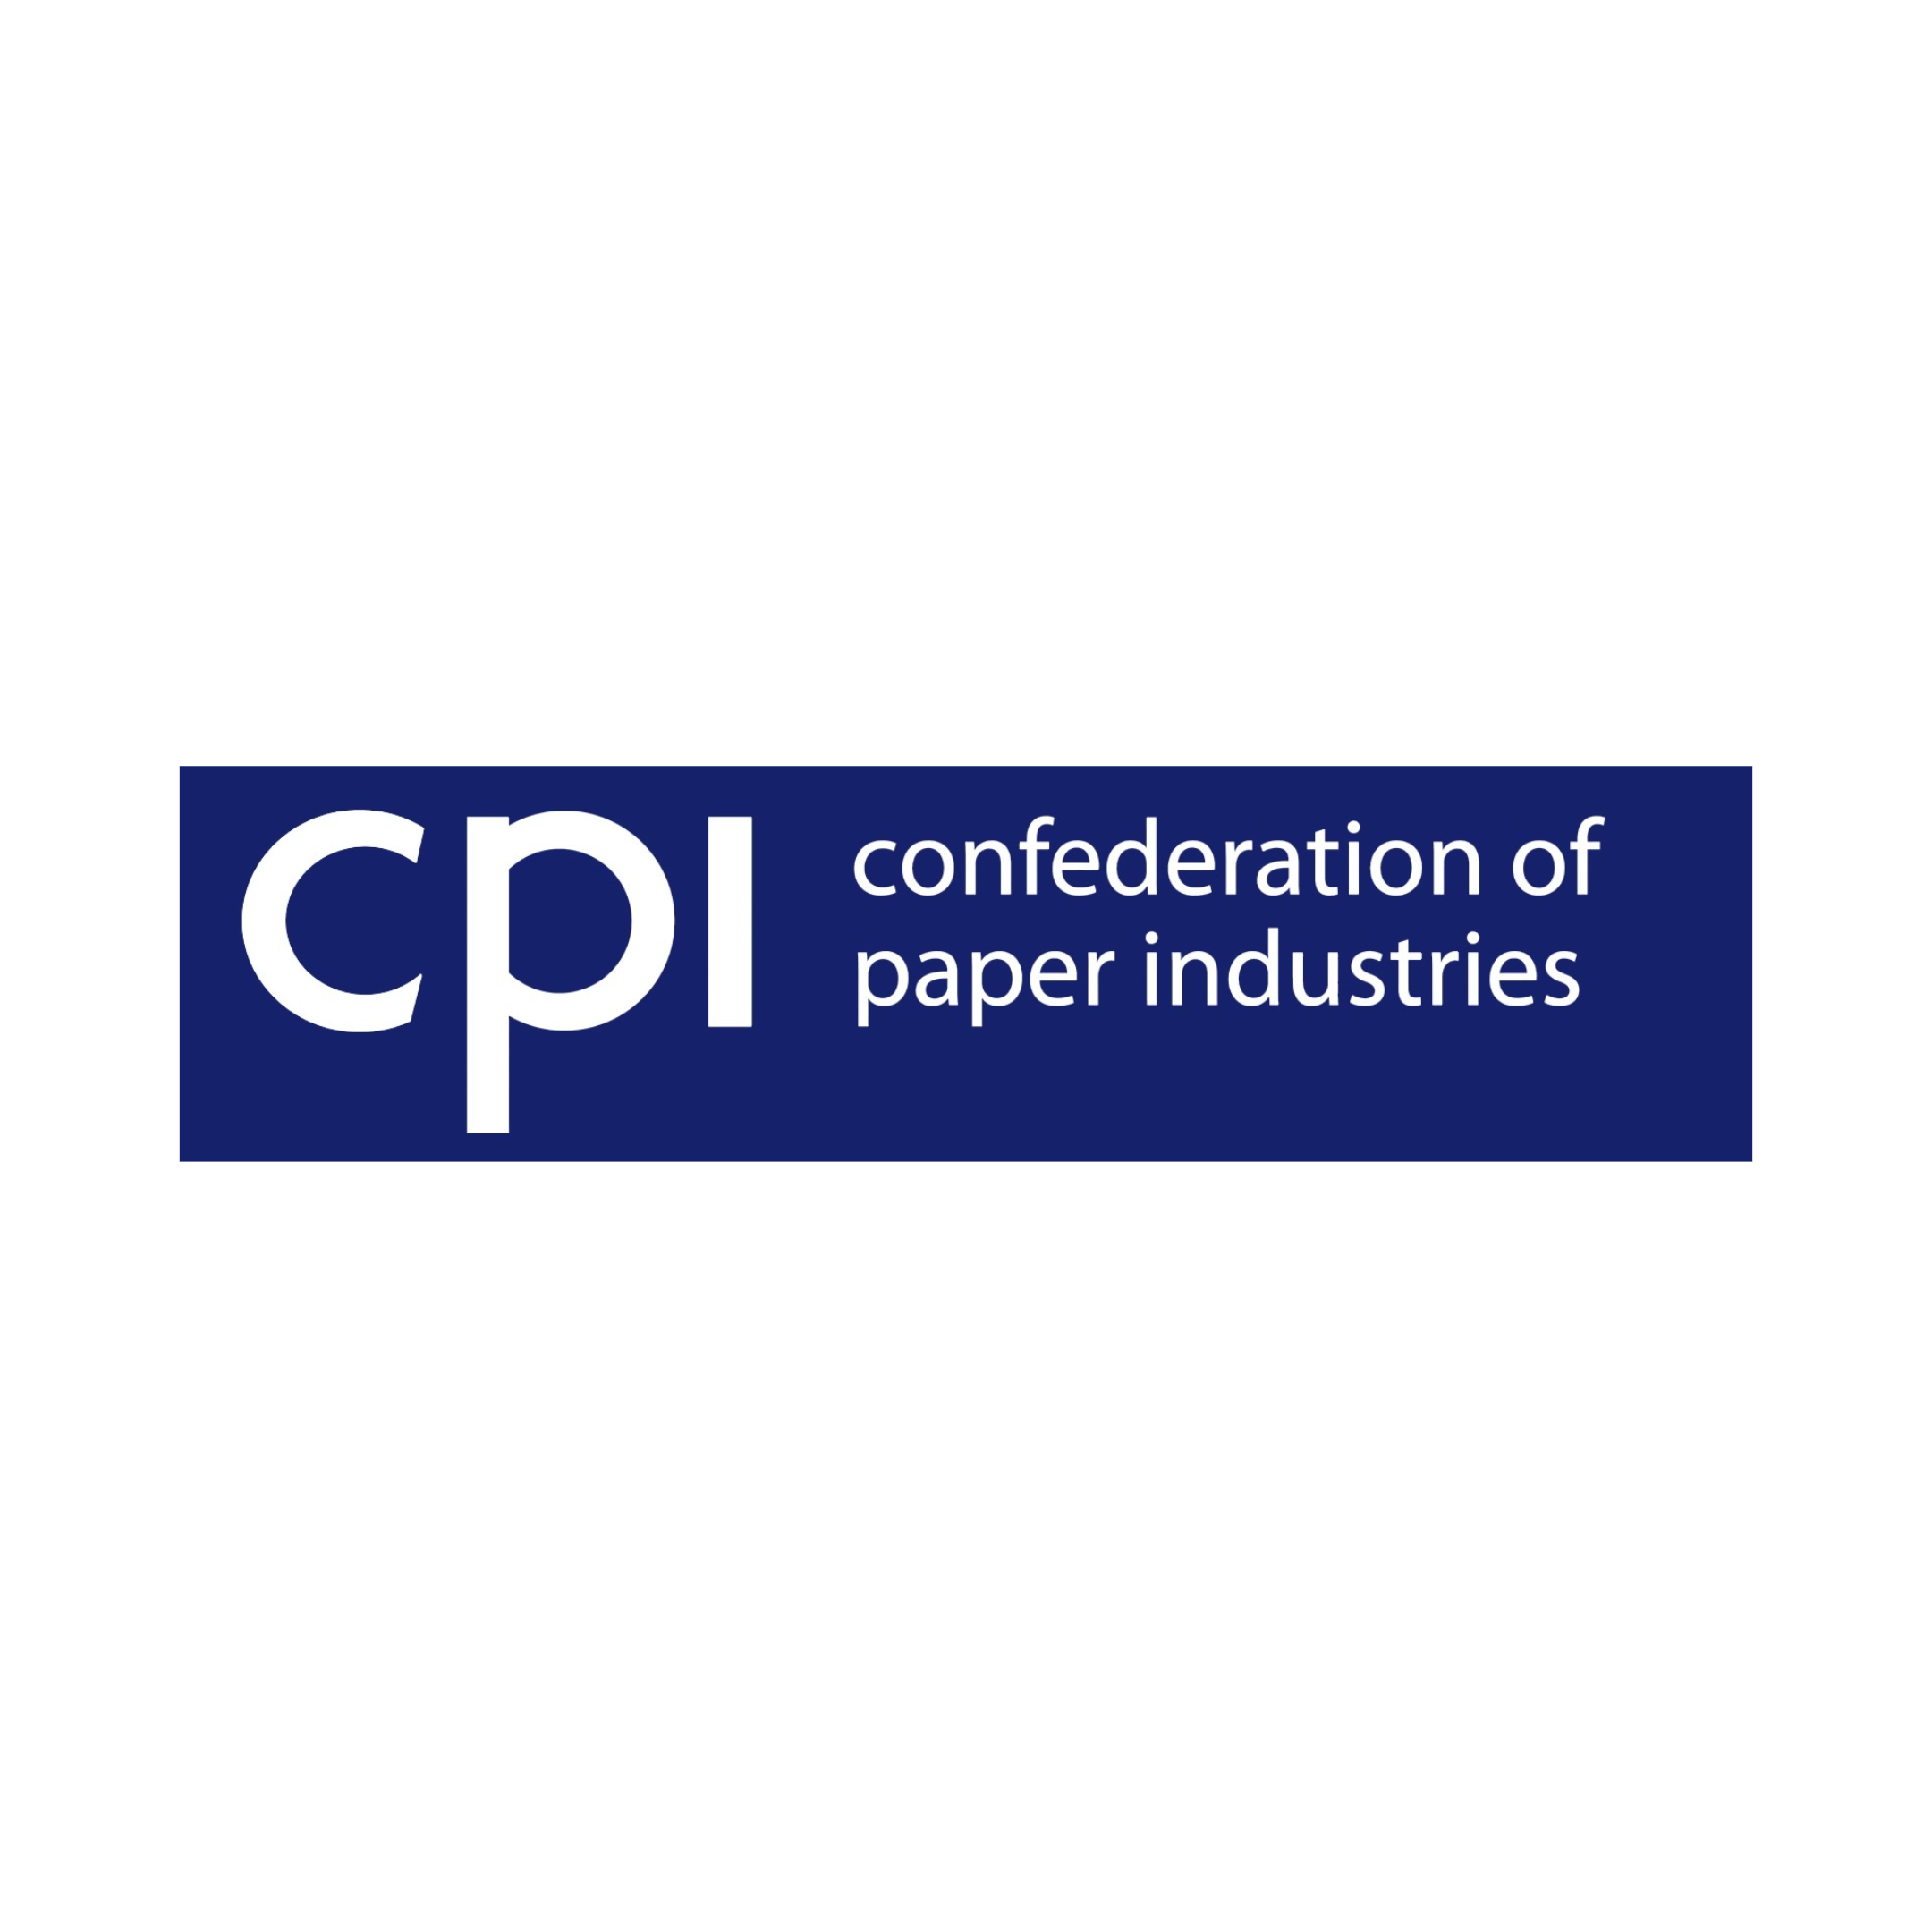 CPI - The Confederation of Paper Industries